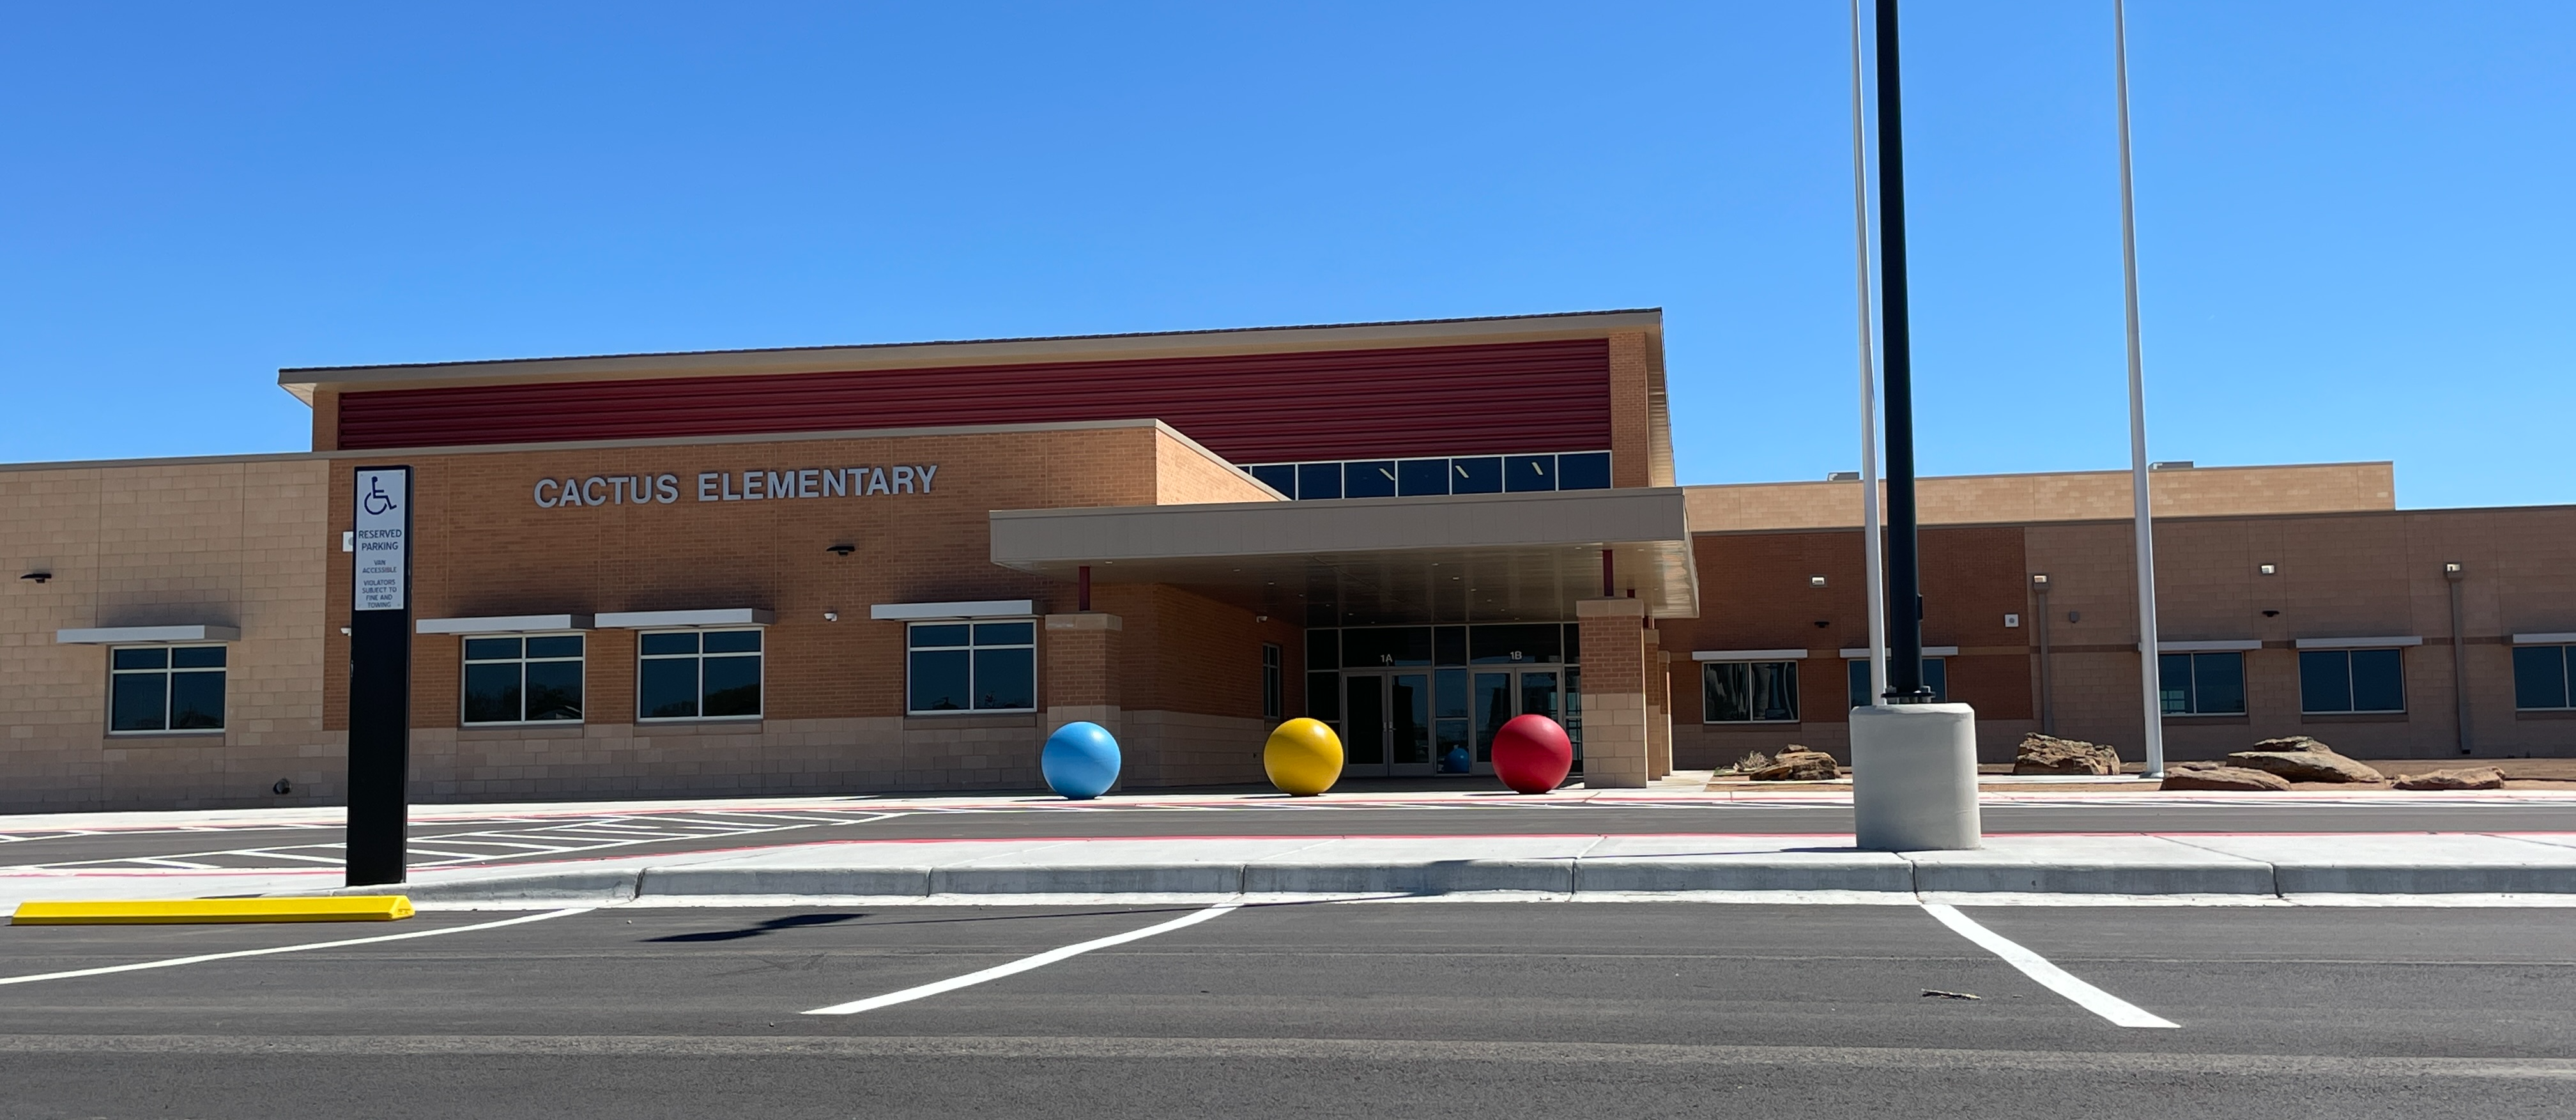 Photo of the entrance to the new Cactus Elementary school